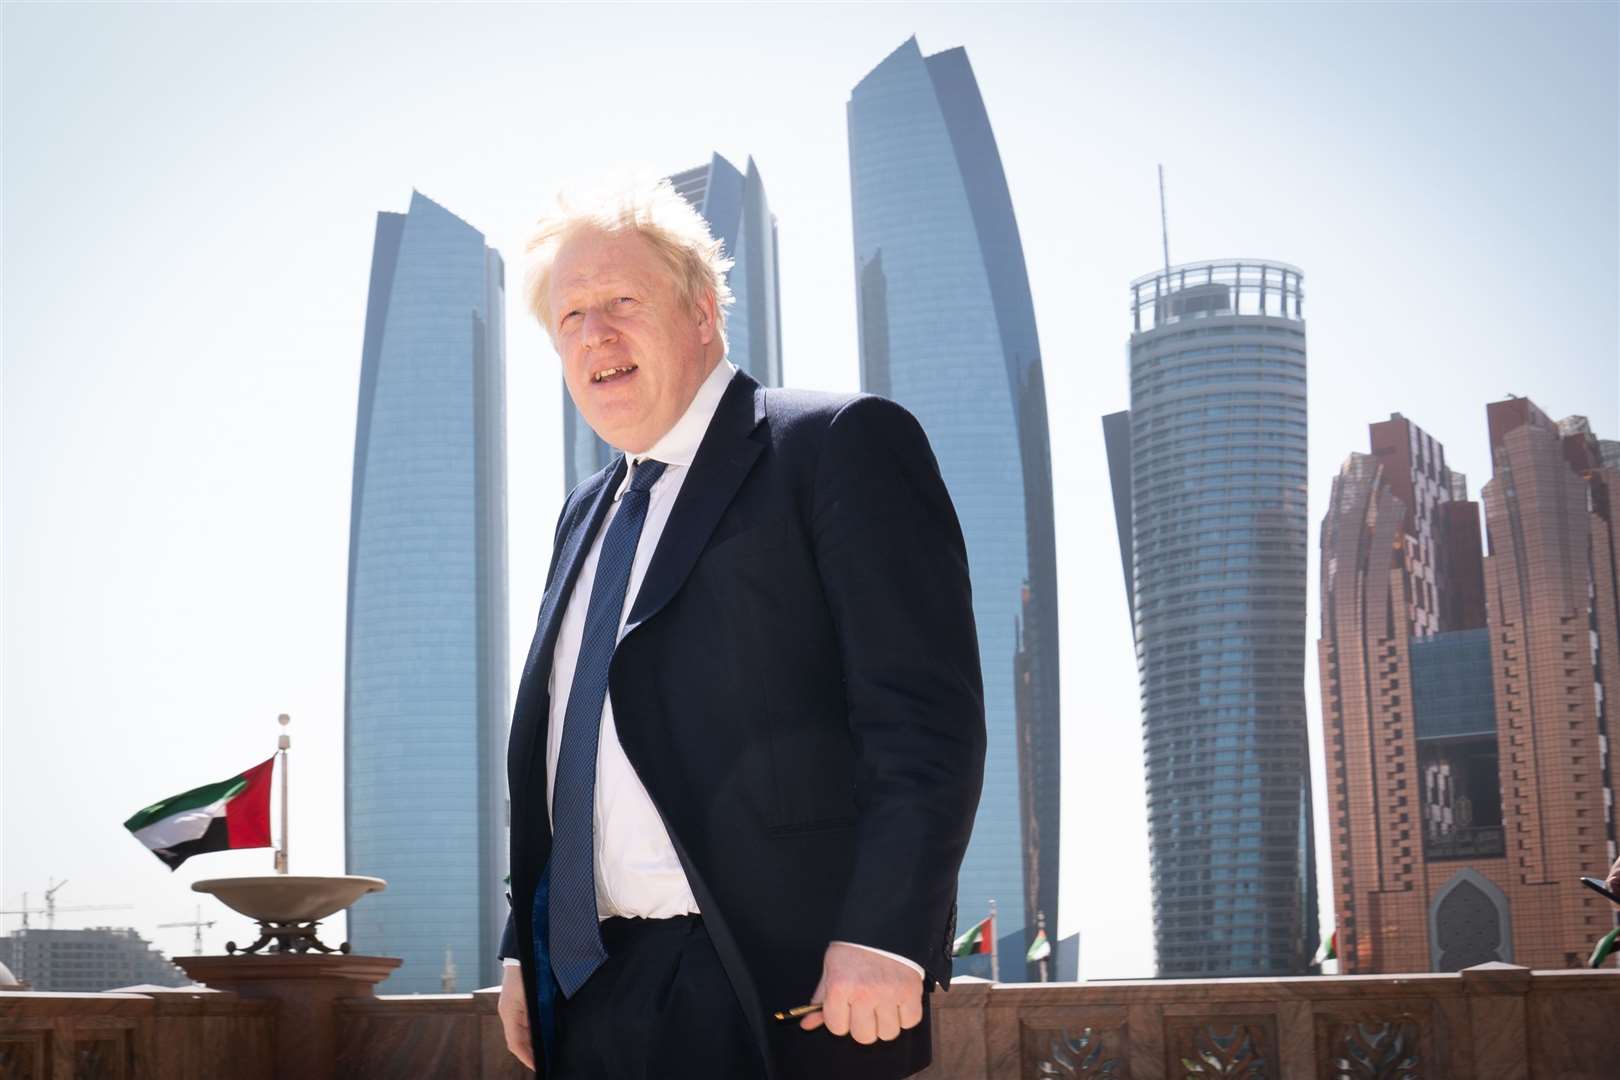 Prime Minister Boris Johnson arrives for a media interview at the Emirates Palace hotel in Abu Dhabi during his visit to the United Arab Emirates (Stefan Rousseau/PA)